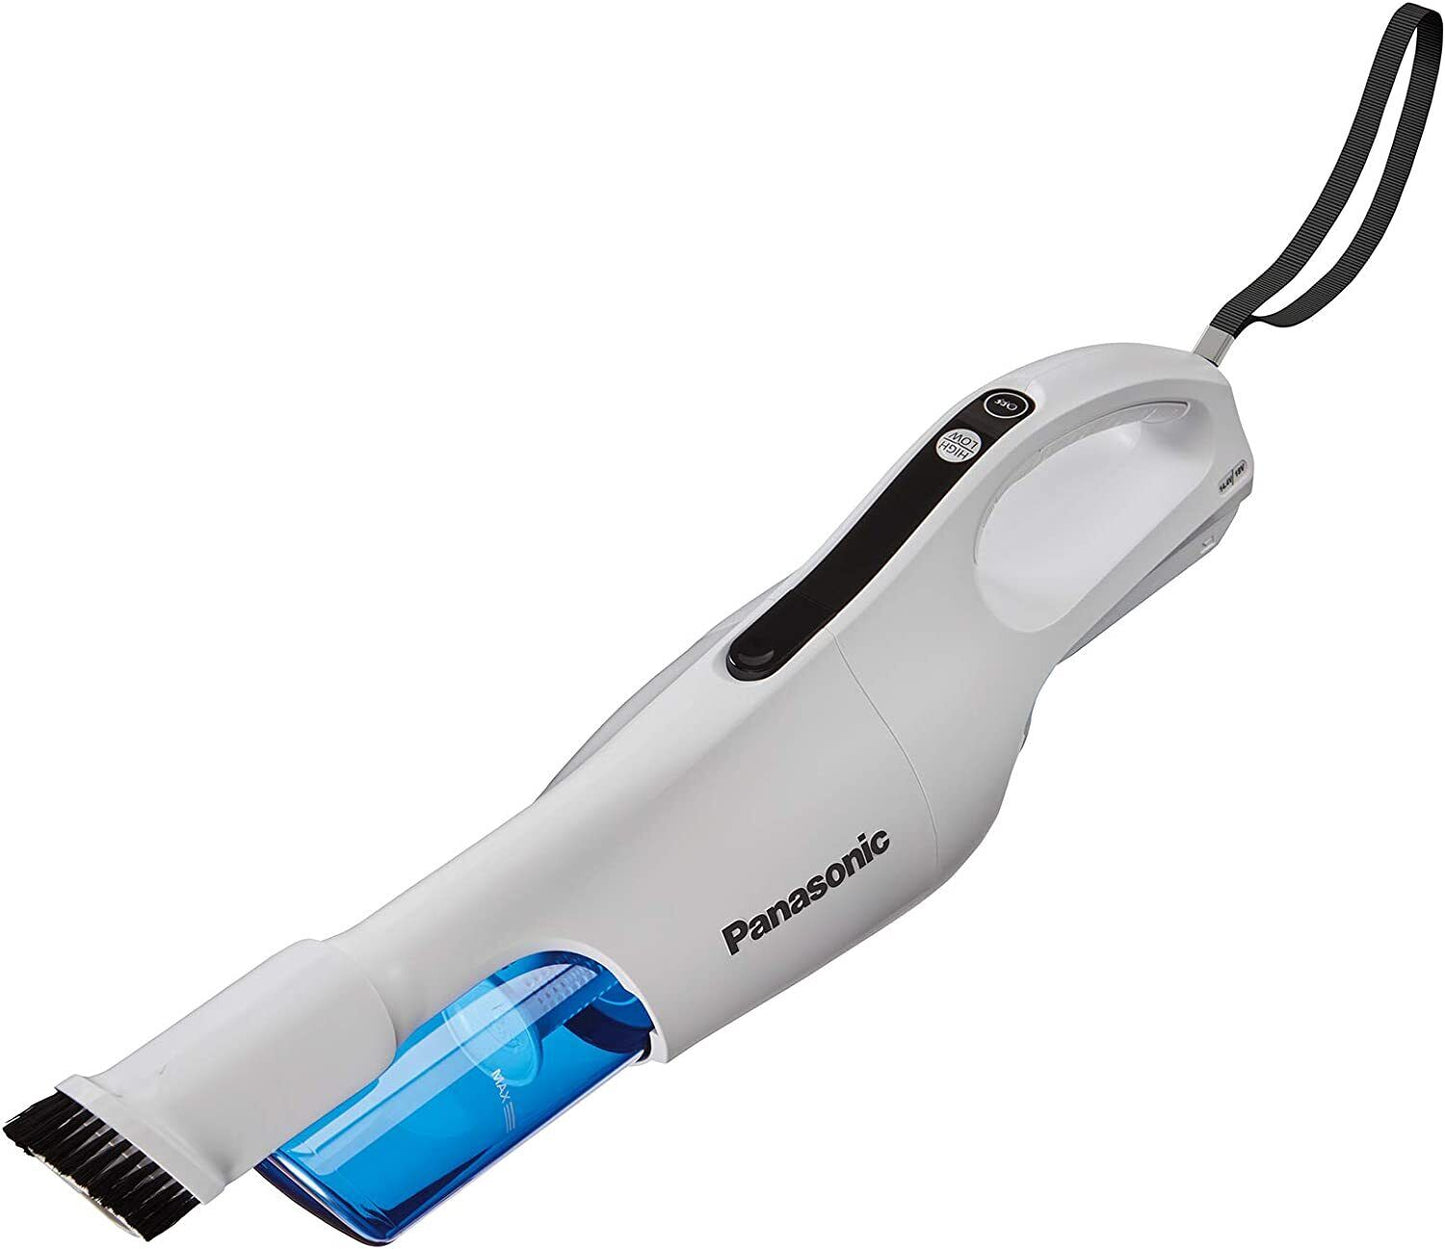 EZ37A5X Panasonic 14.4 18V Cordless Stick Cyclone Cleaner Body Only Japan New